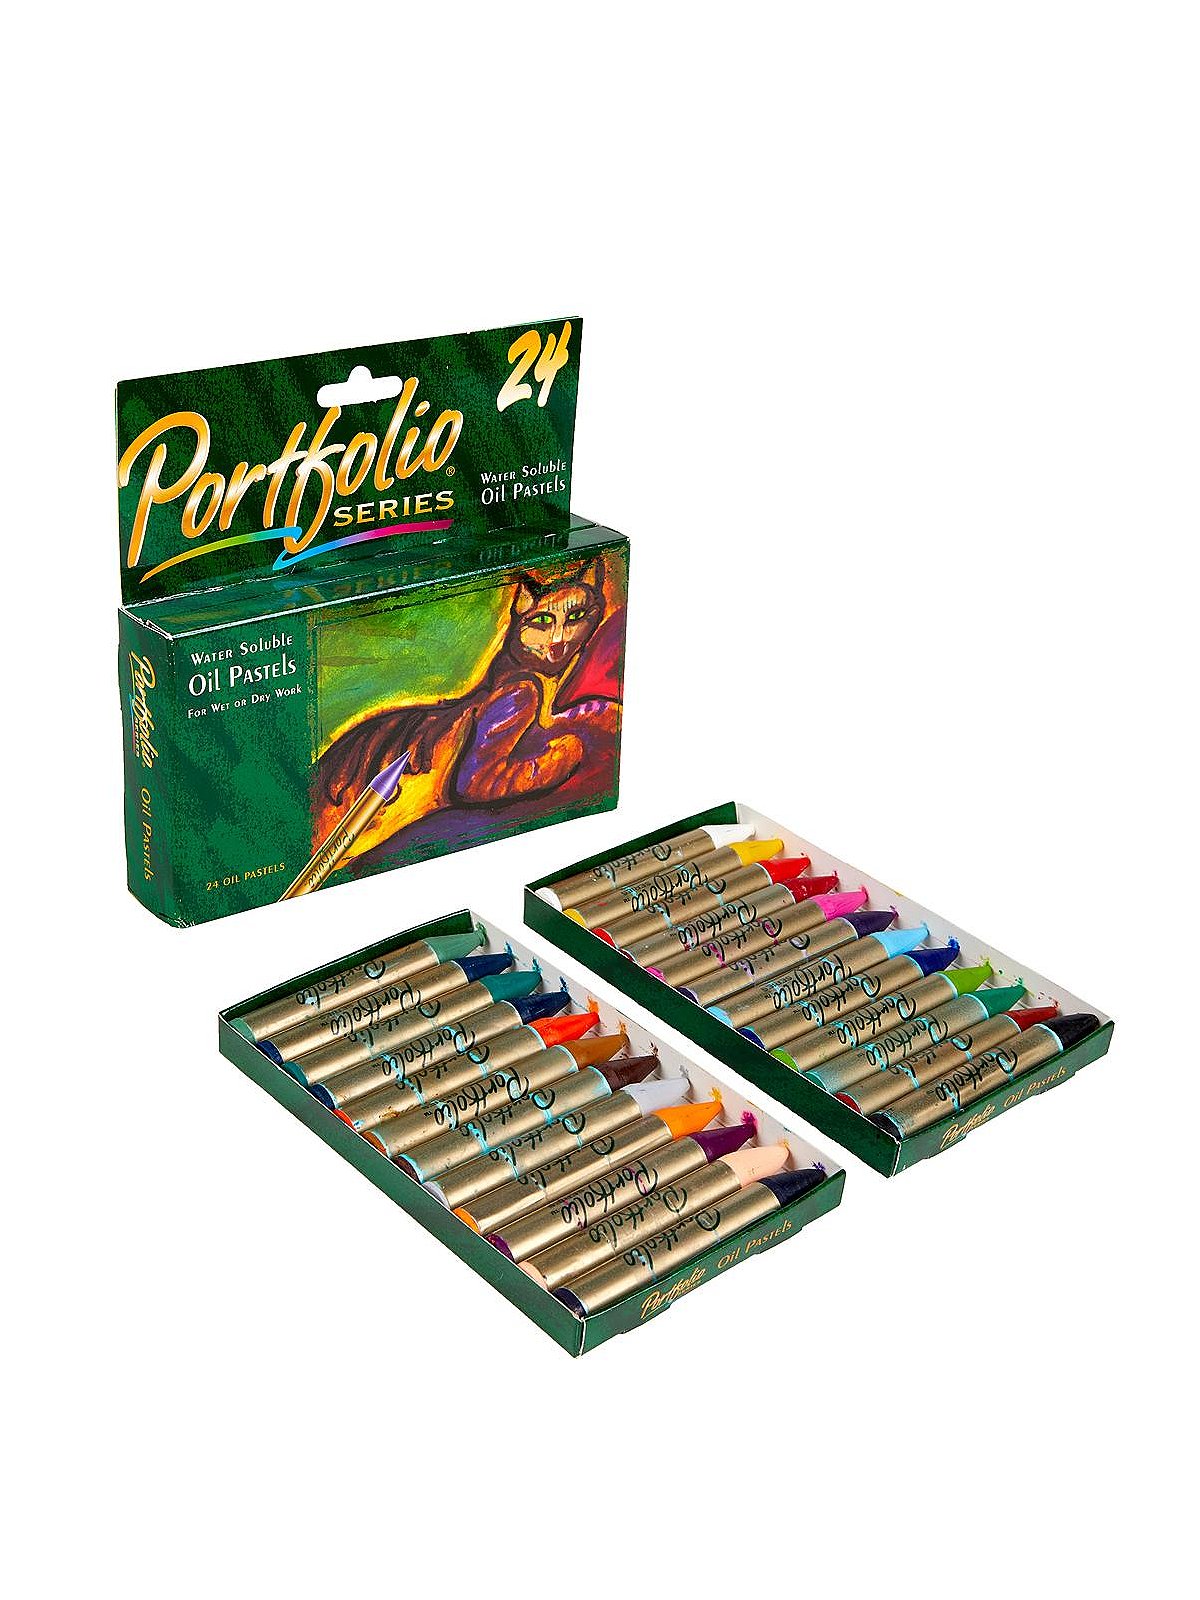 Crayola Oil Pastels : First Impressions from drawing a colorful